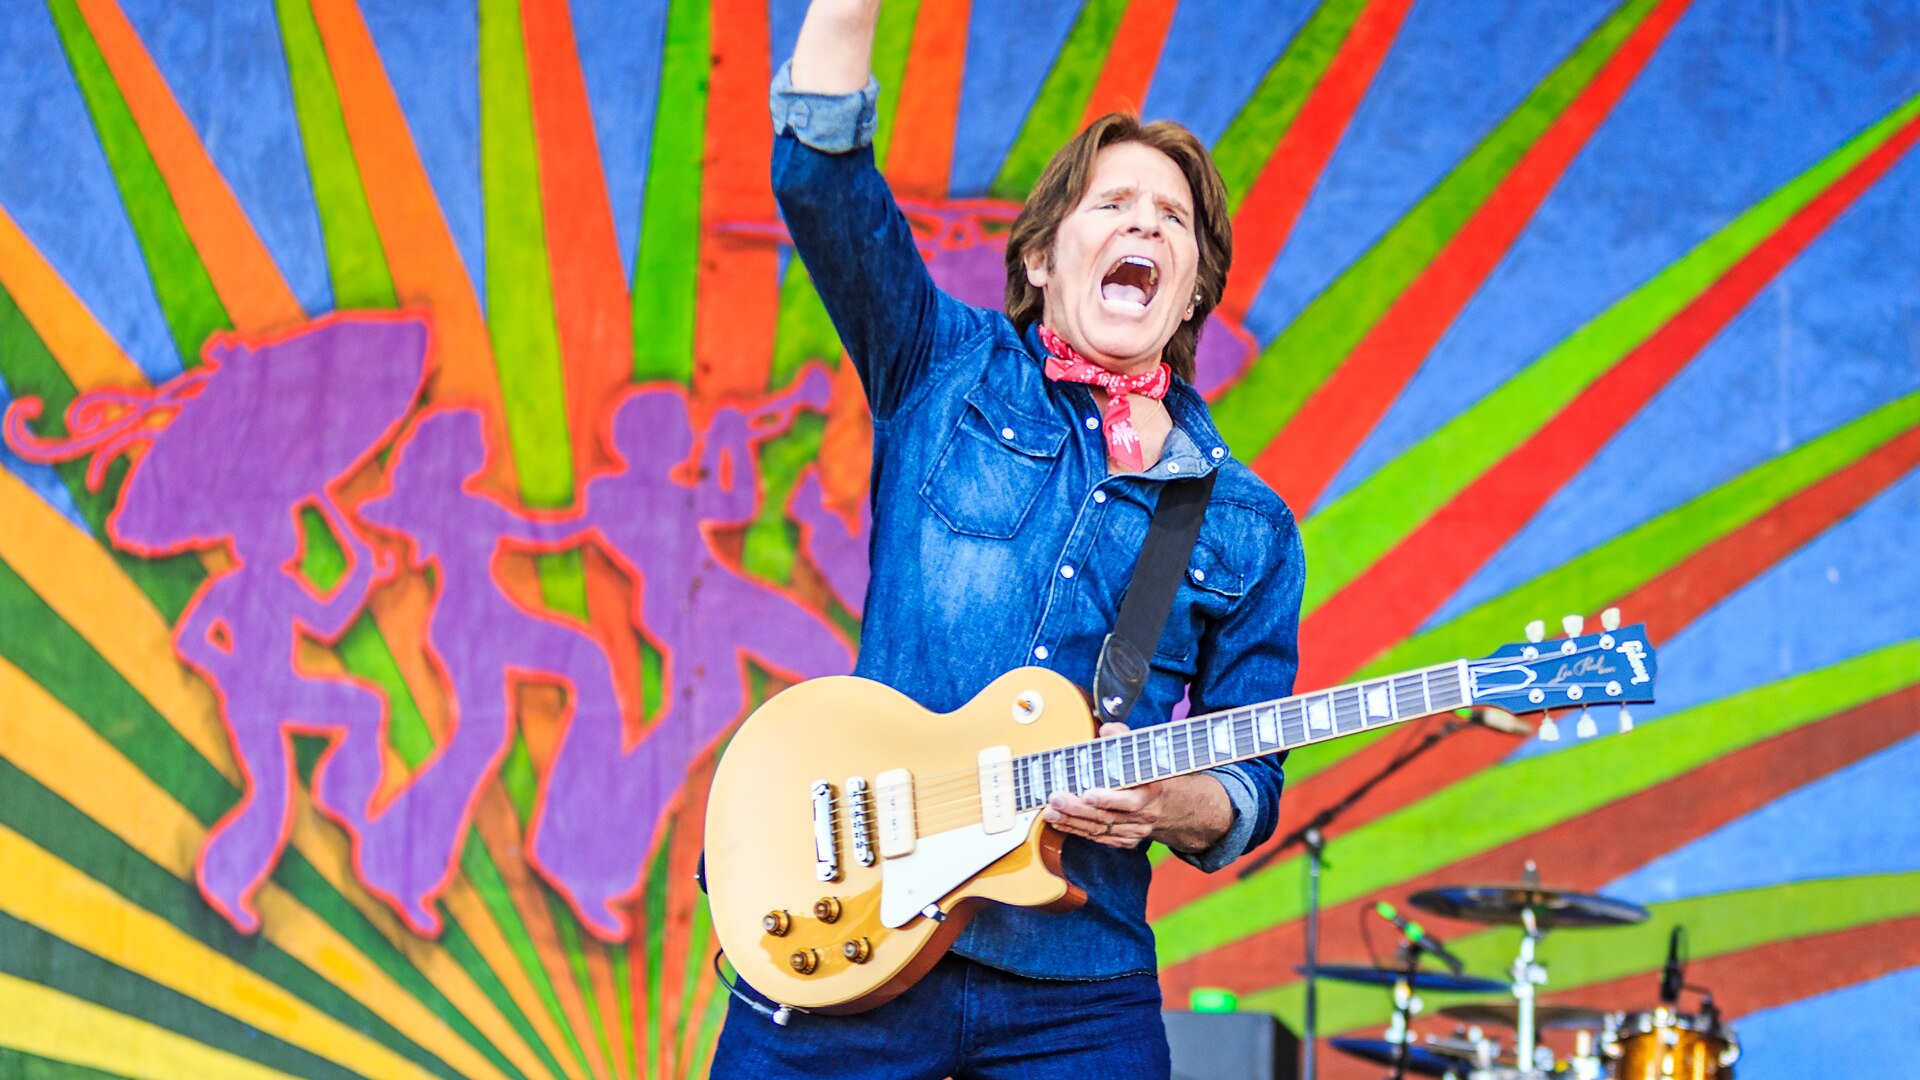 creedence clearwater revival frontman john fogerty will play one australian show this march